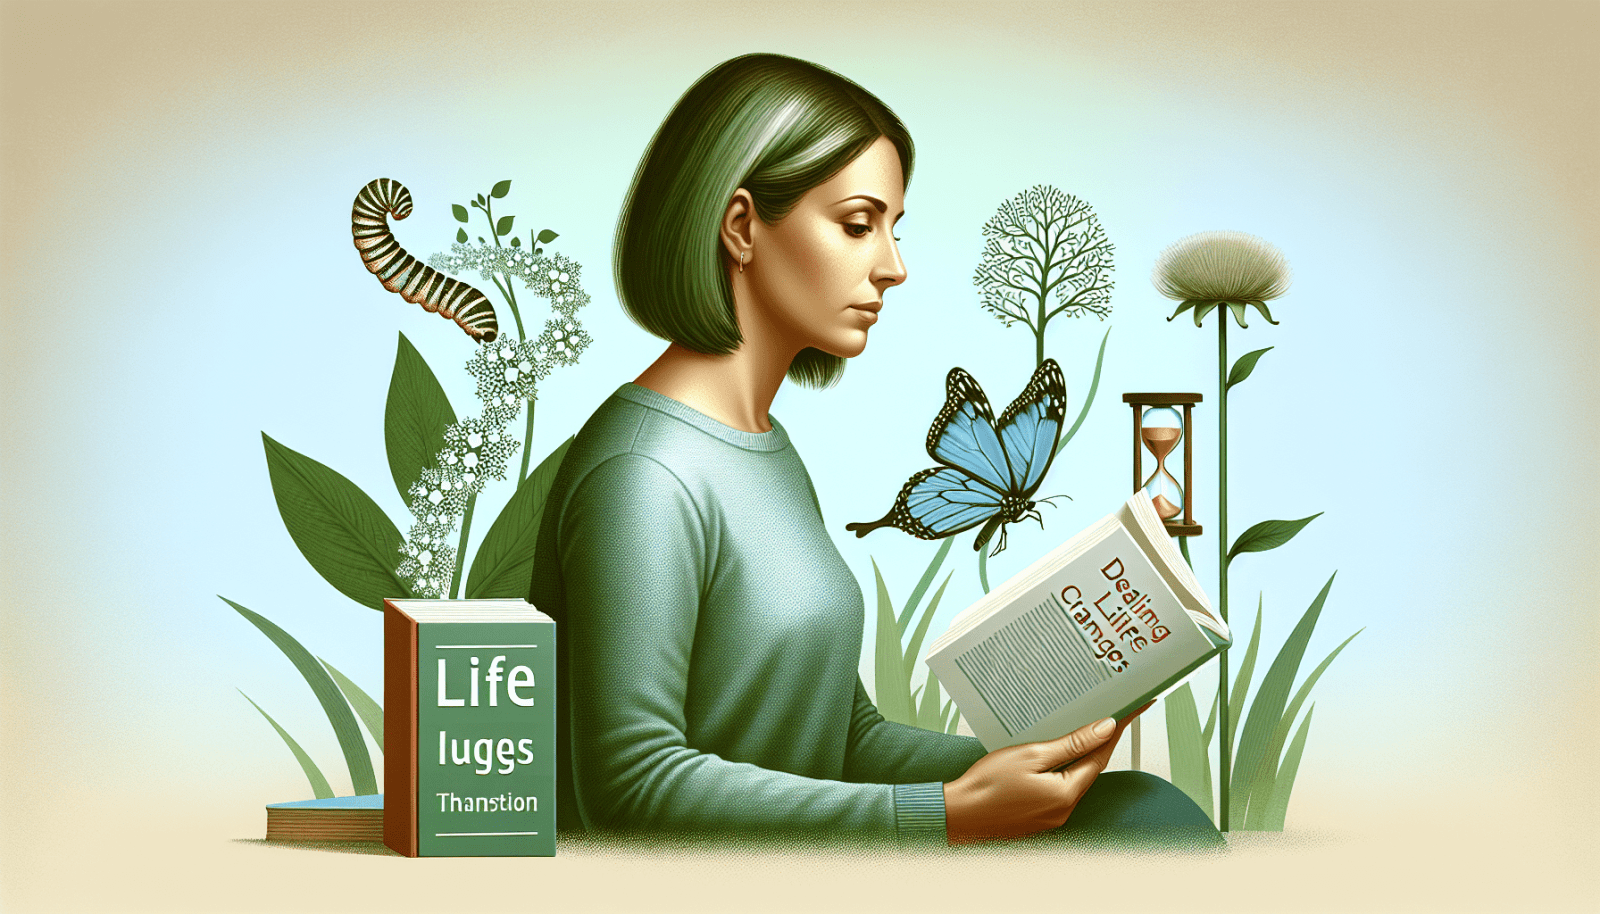 Illustration of a woman in profile reading a book titled "Dealing with Life Changes," with symbolic elements including a butterfly, a caterpillar on a flower, a dandelion clock, and a sand hourglass, and a second book with the title "Life lugges Thansition."